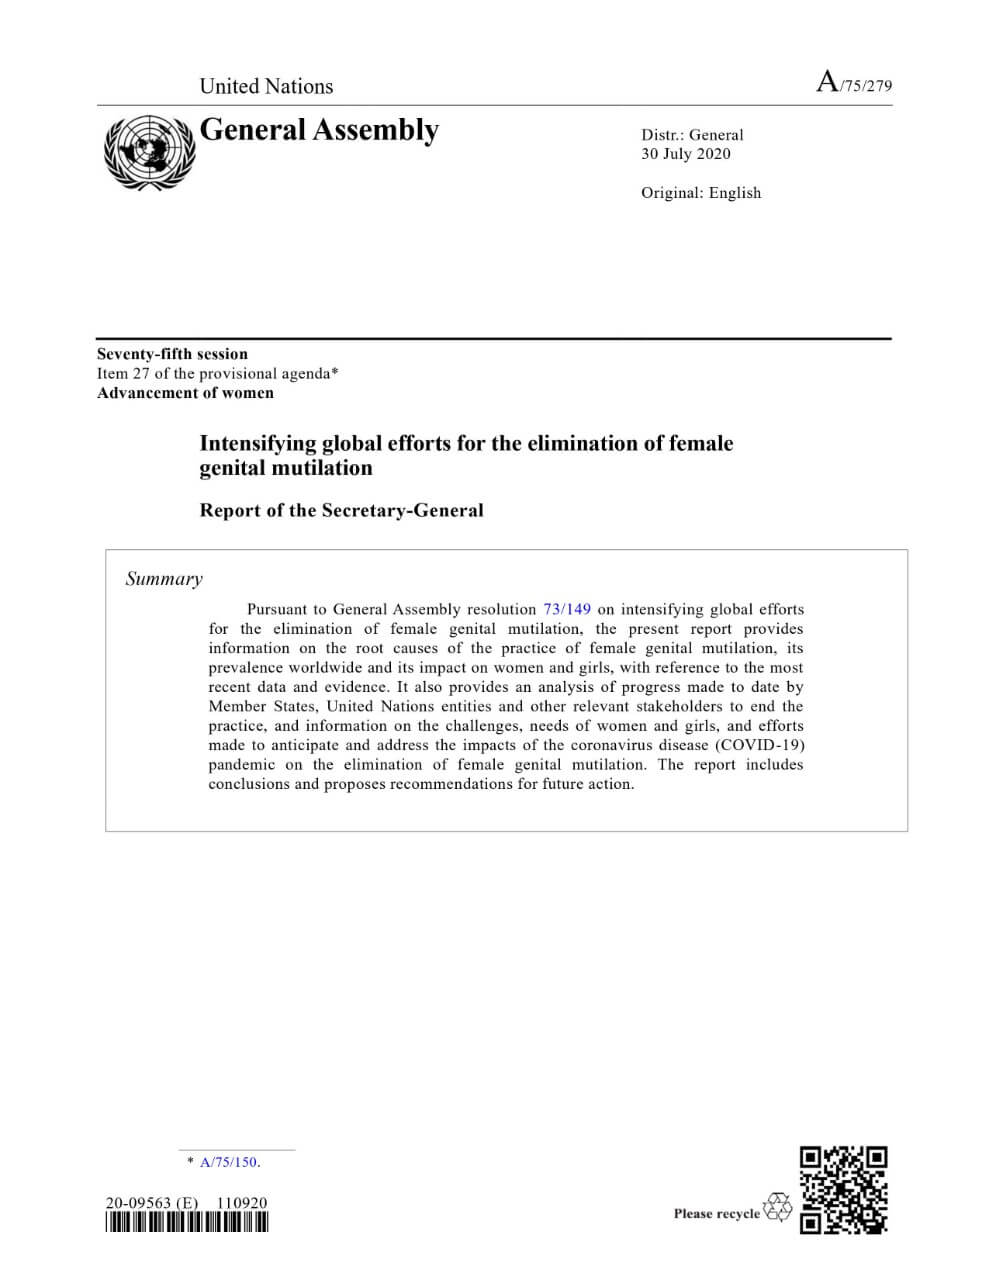 Intensifying global efforts for the elimination of female genital mutilations: Report of the Secretary-General (2020)